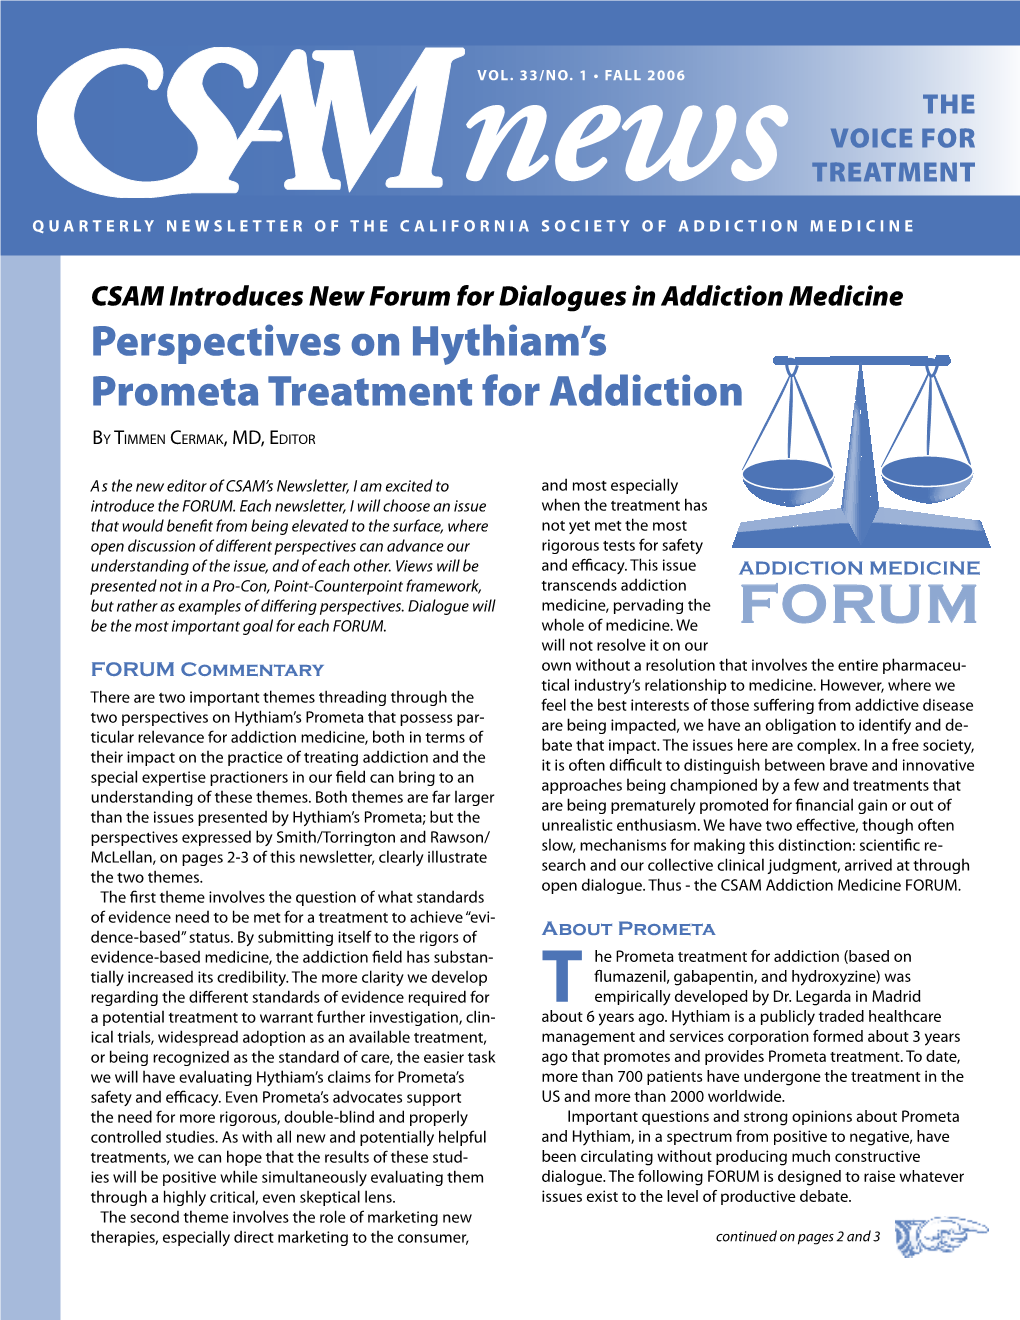 Perspectives on Hythiam's Prometa Treatment for Addiction